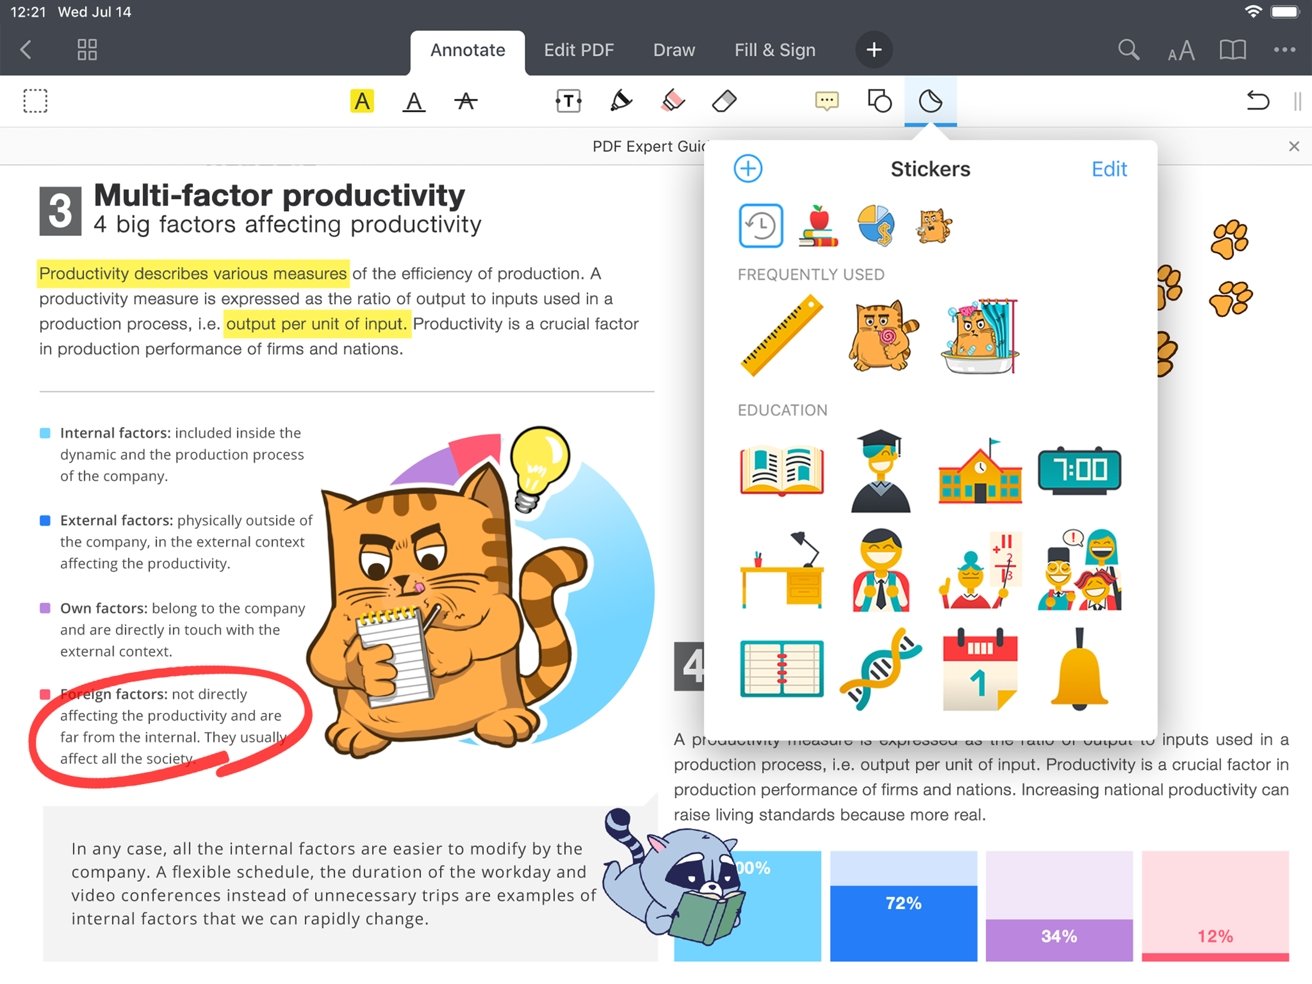 PDF Expert's annotation tools cover highlighting text, drawing, and even applying stickers. 